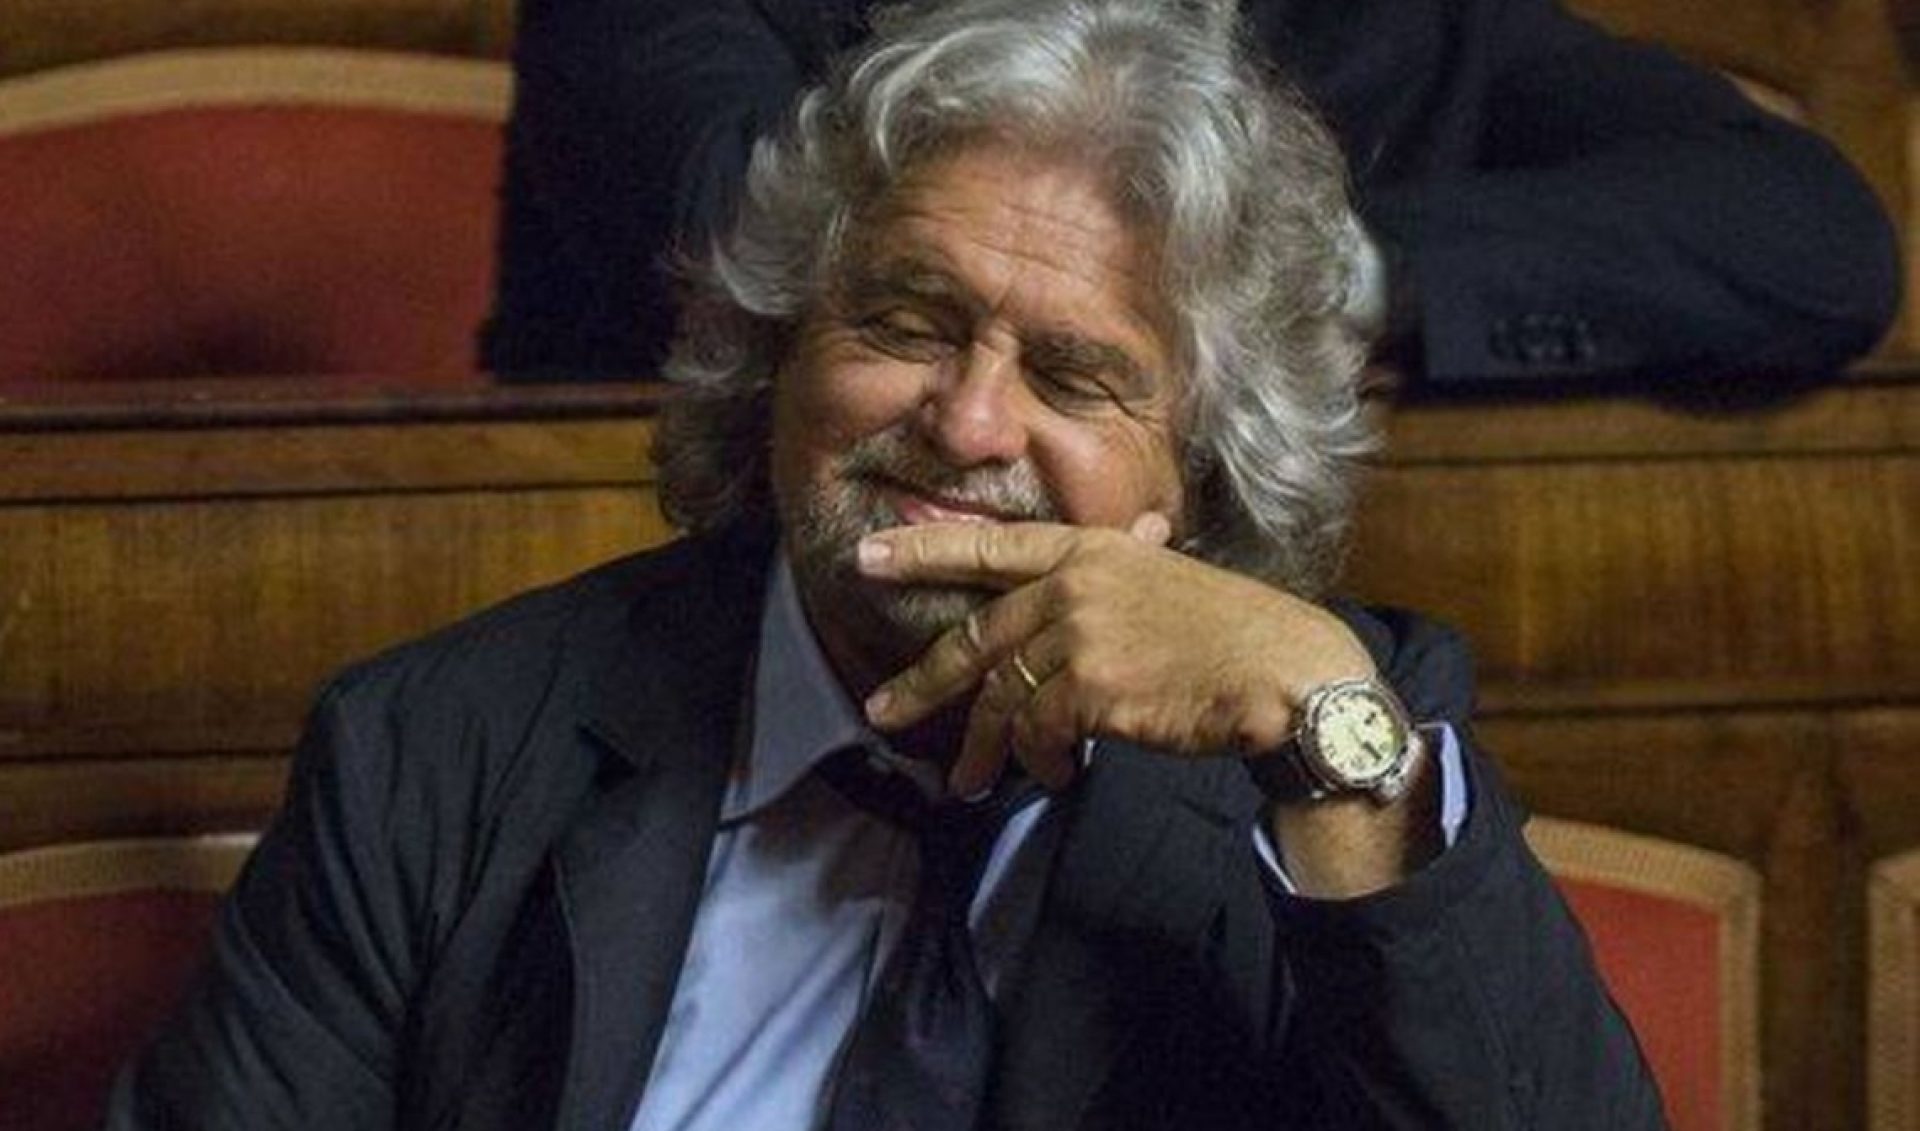 Netflix To Debut ‘Grillo Vs. Grillo’ Comedy Special On Friday, Its First Italian Original